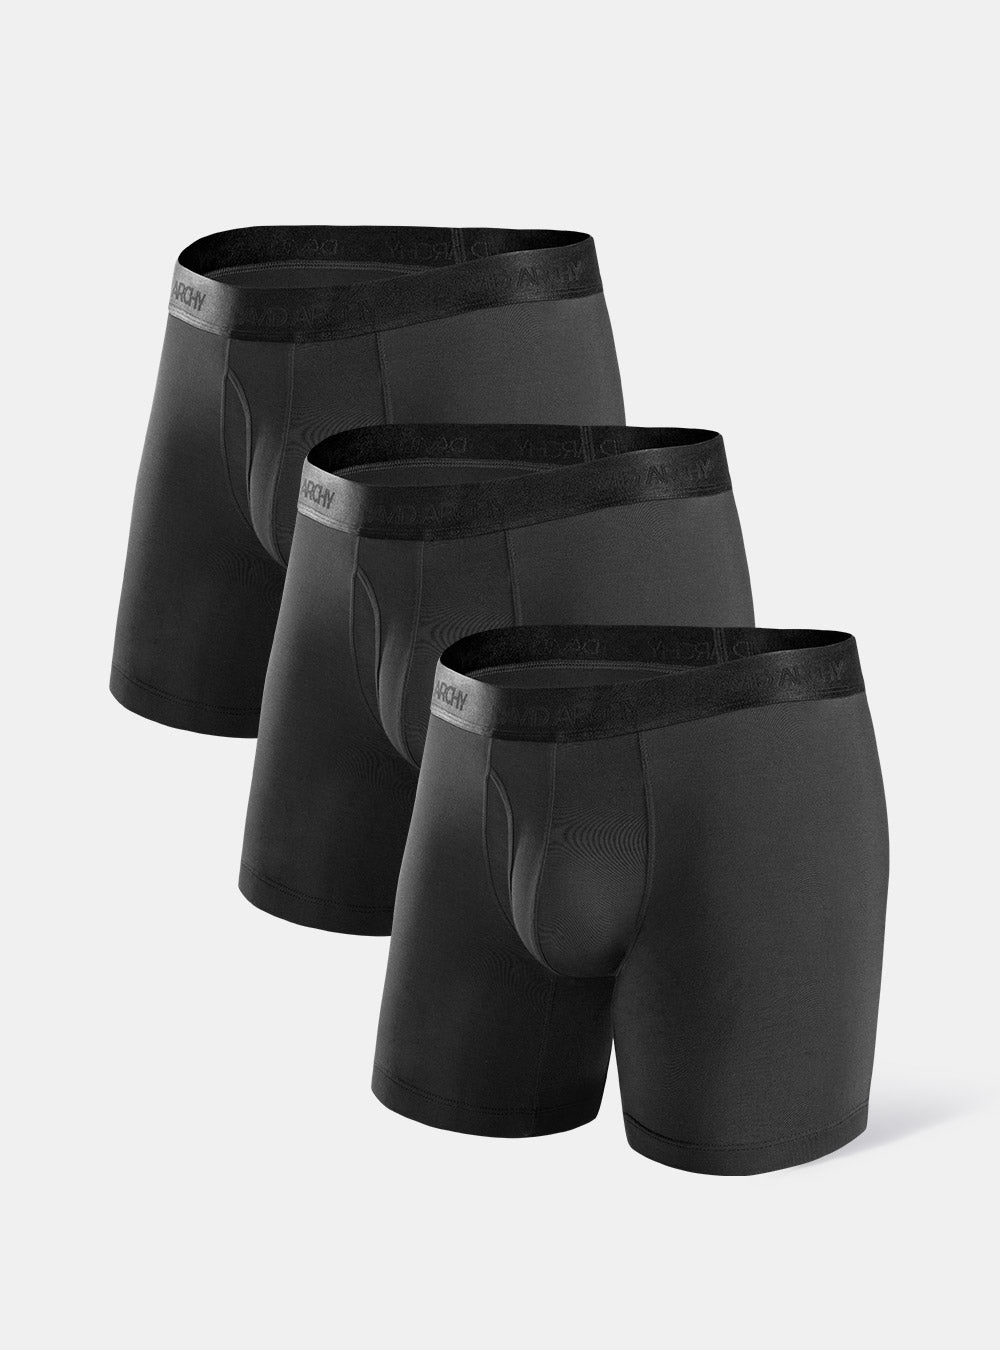 3 Packs MicroModal Trunks with Pouch David Archy Seamless